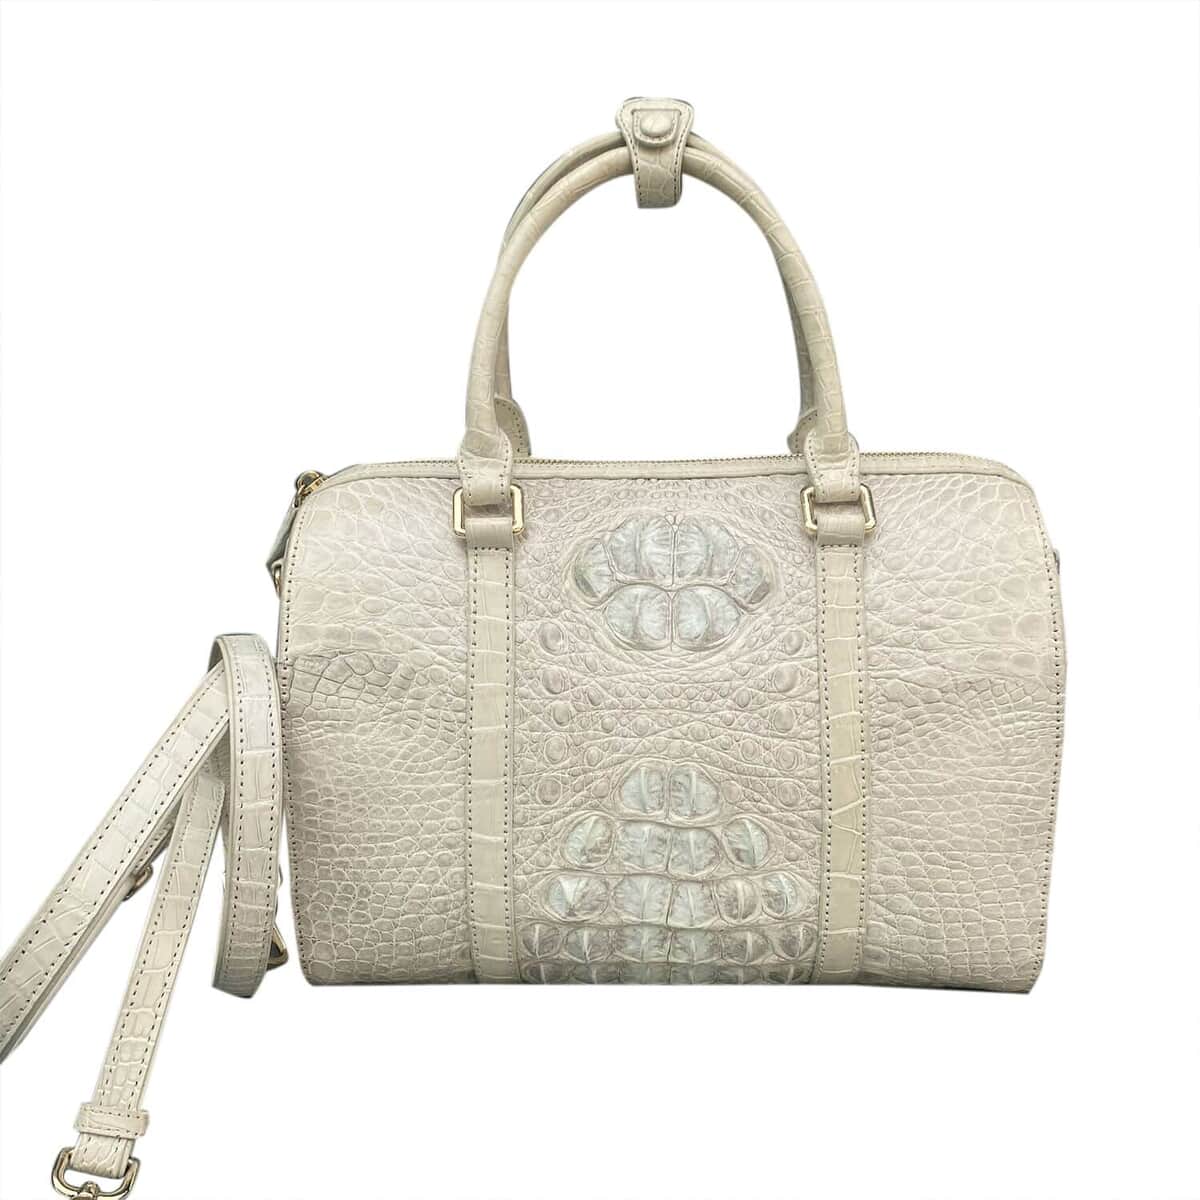 Grand Pelle Genuine Crocodile Leather Natural White Tote Bag (11.81"x5.9"x7.87") with Detachable Shoulder Strap image number 0